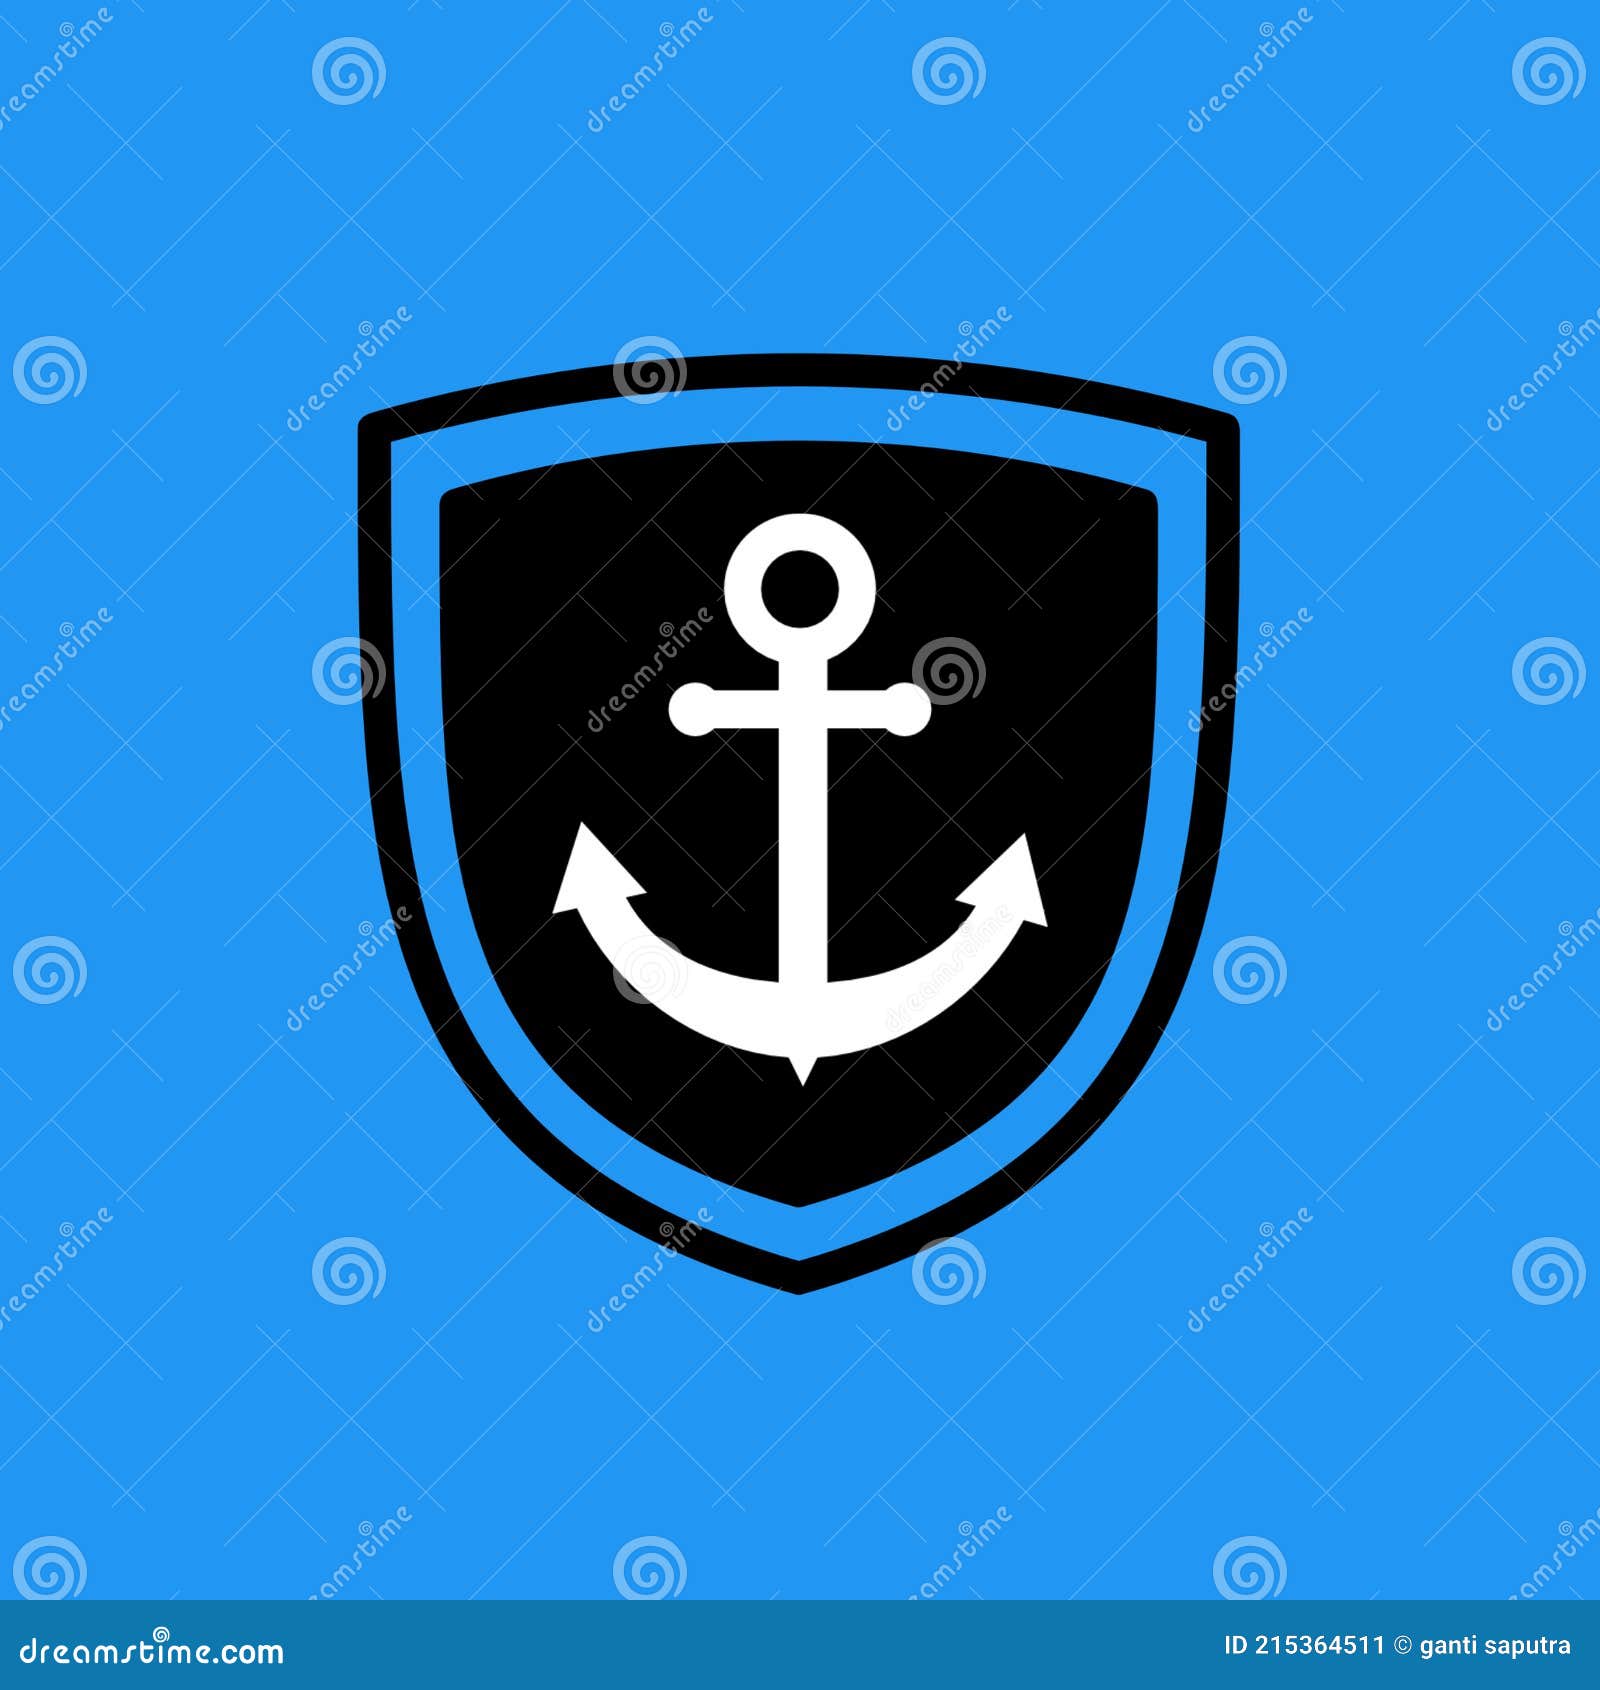 this is an  of the anchor shield loga 